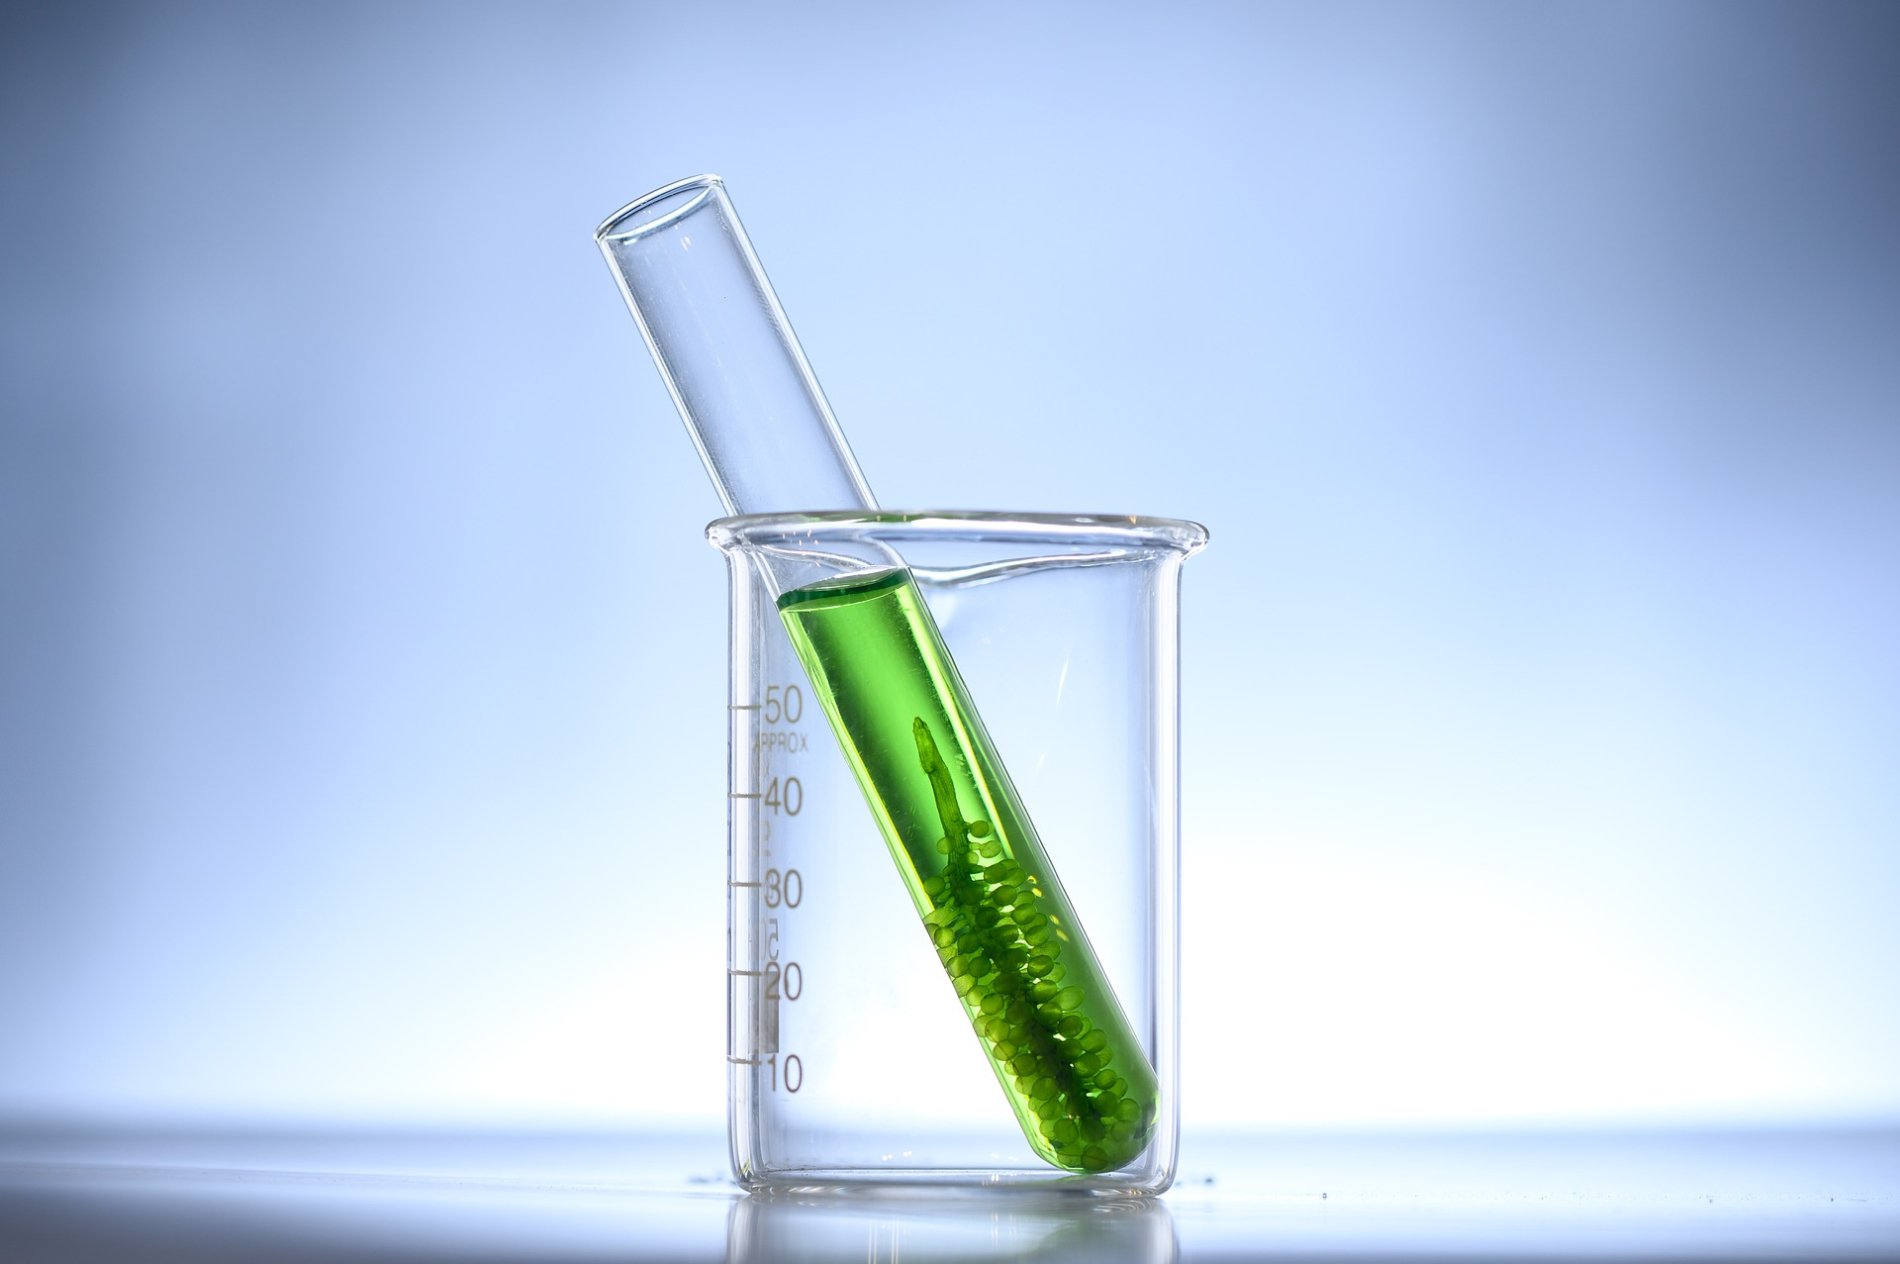 A test tube filled with a green algae-like substance rests in a beaker.